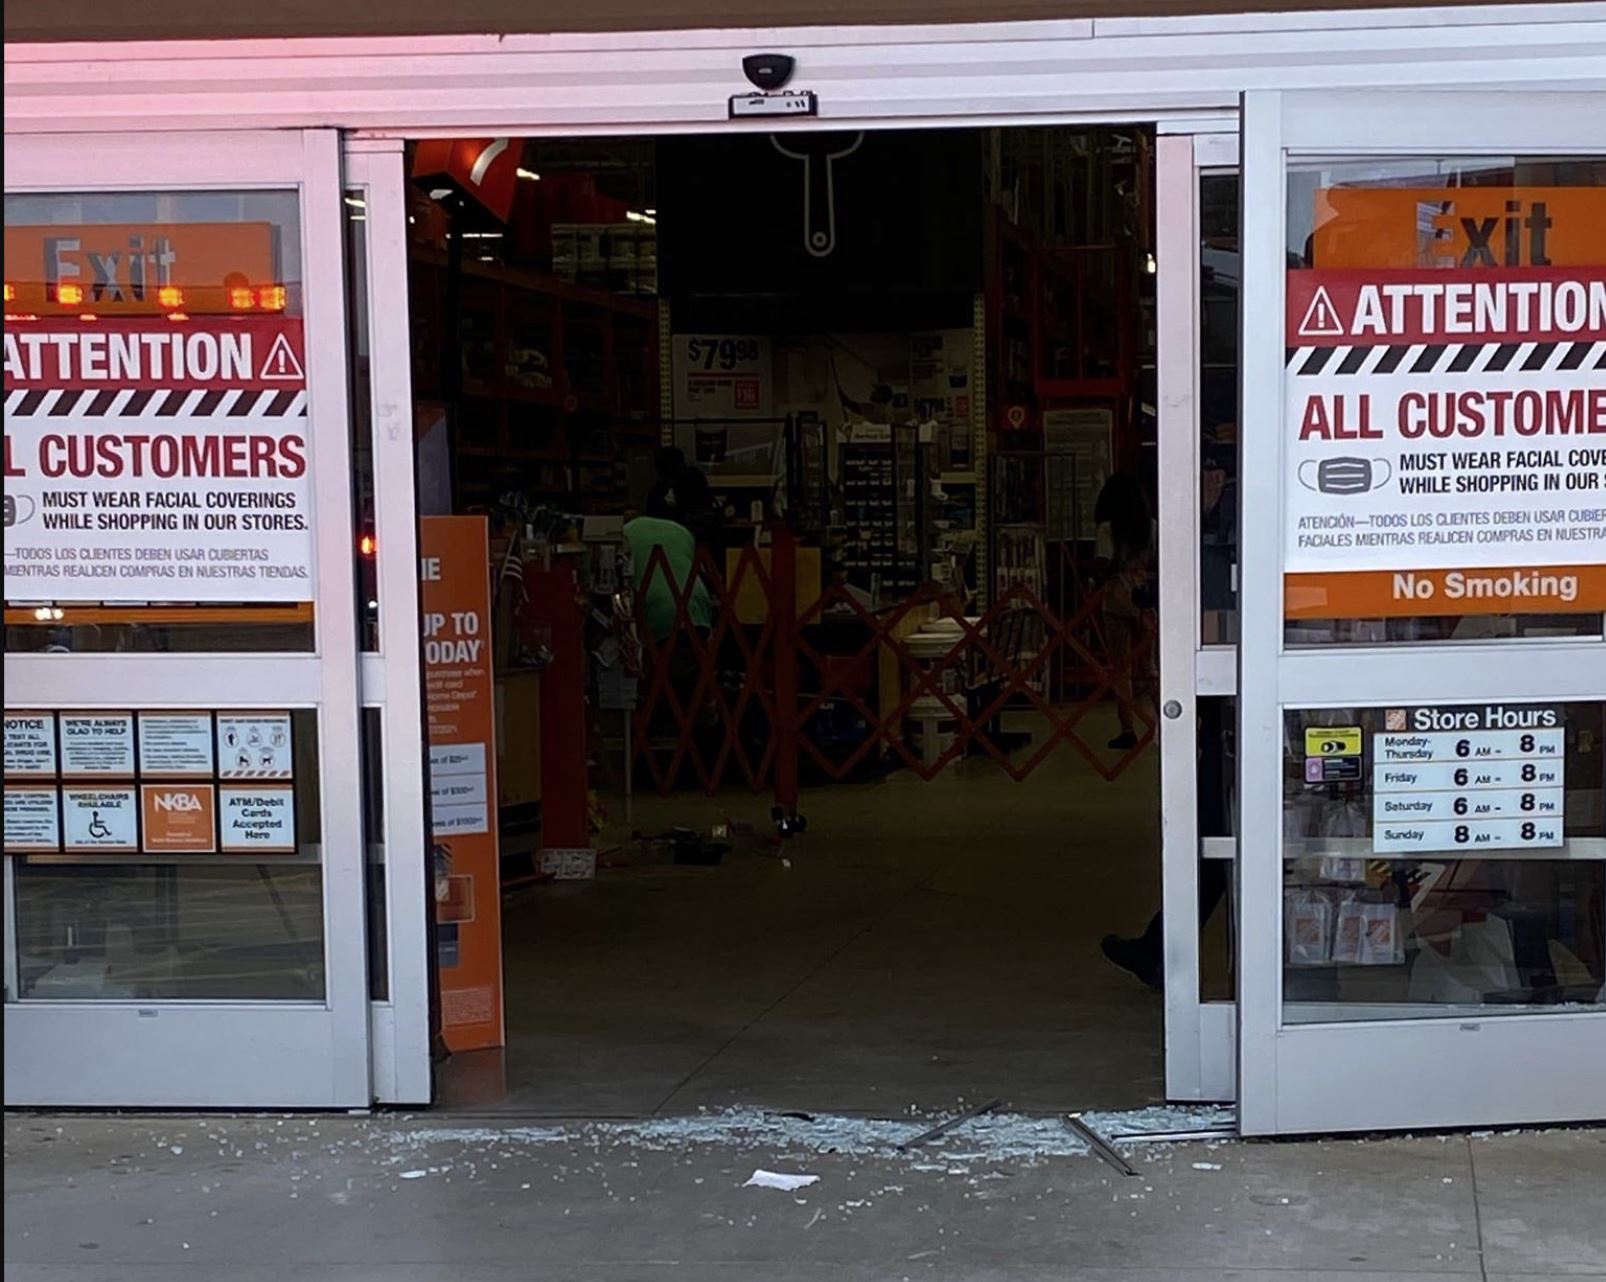 BREAKING: Woman drives into Trussville Home Depot with car, police say she stole items and fled